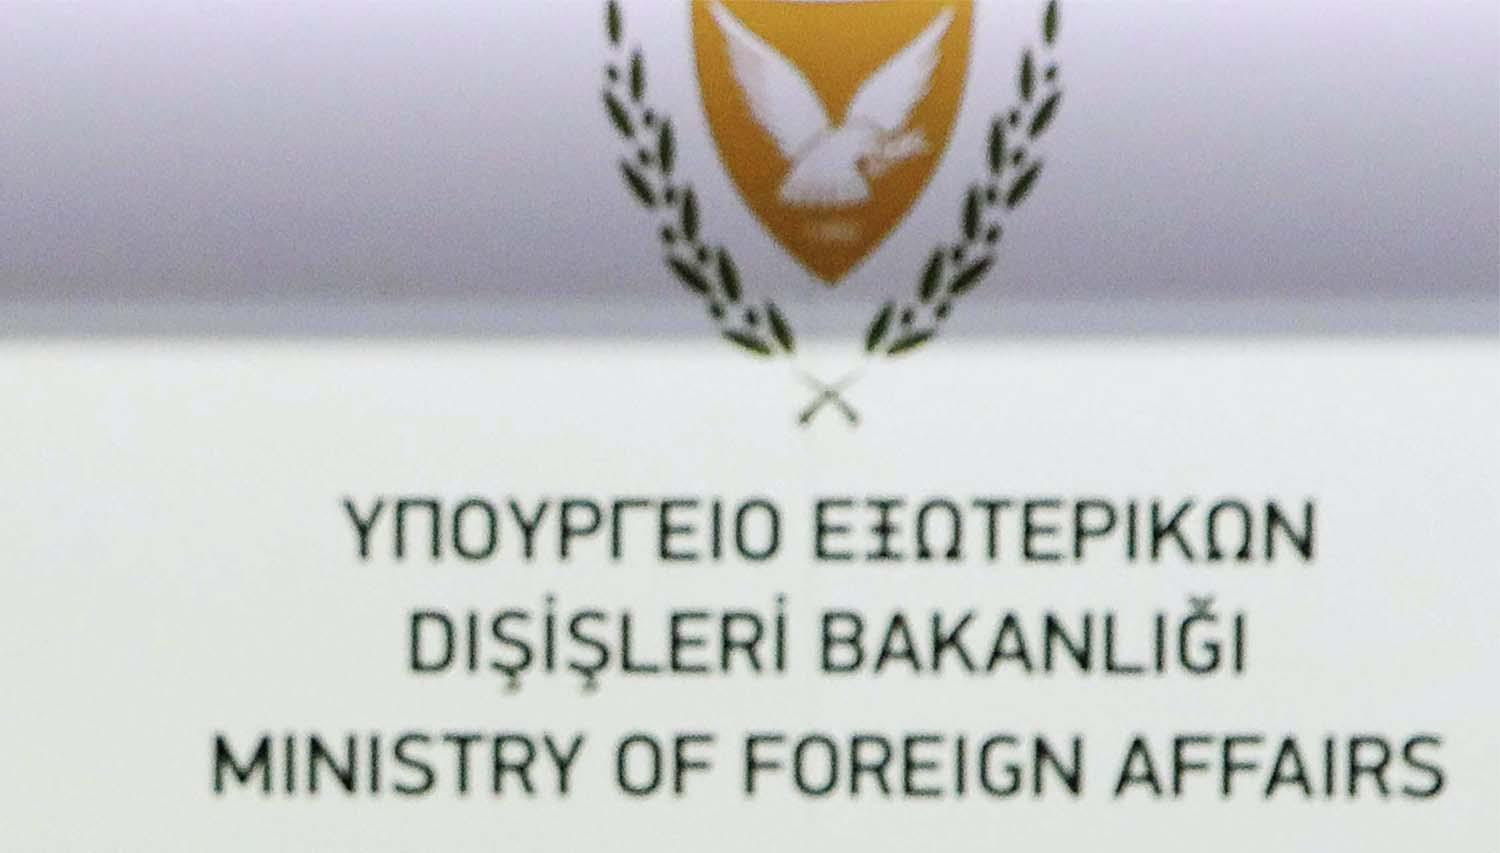 Cyprus foreign ministry